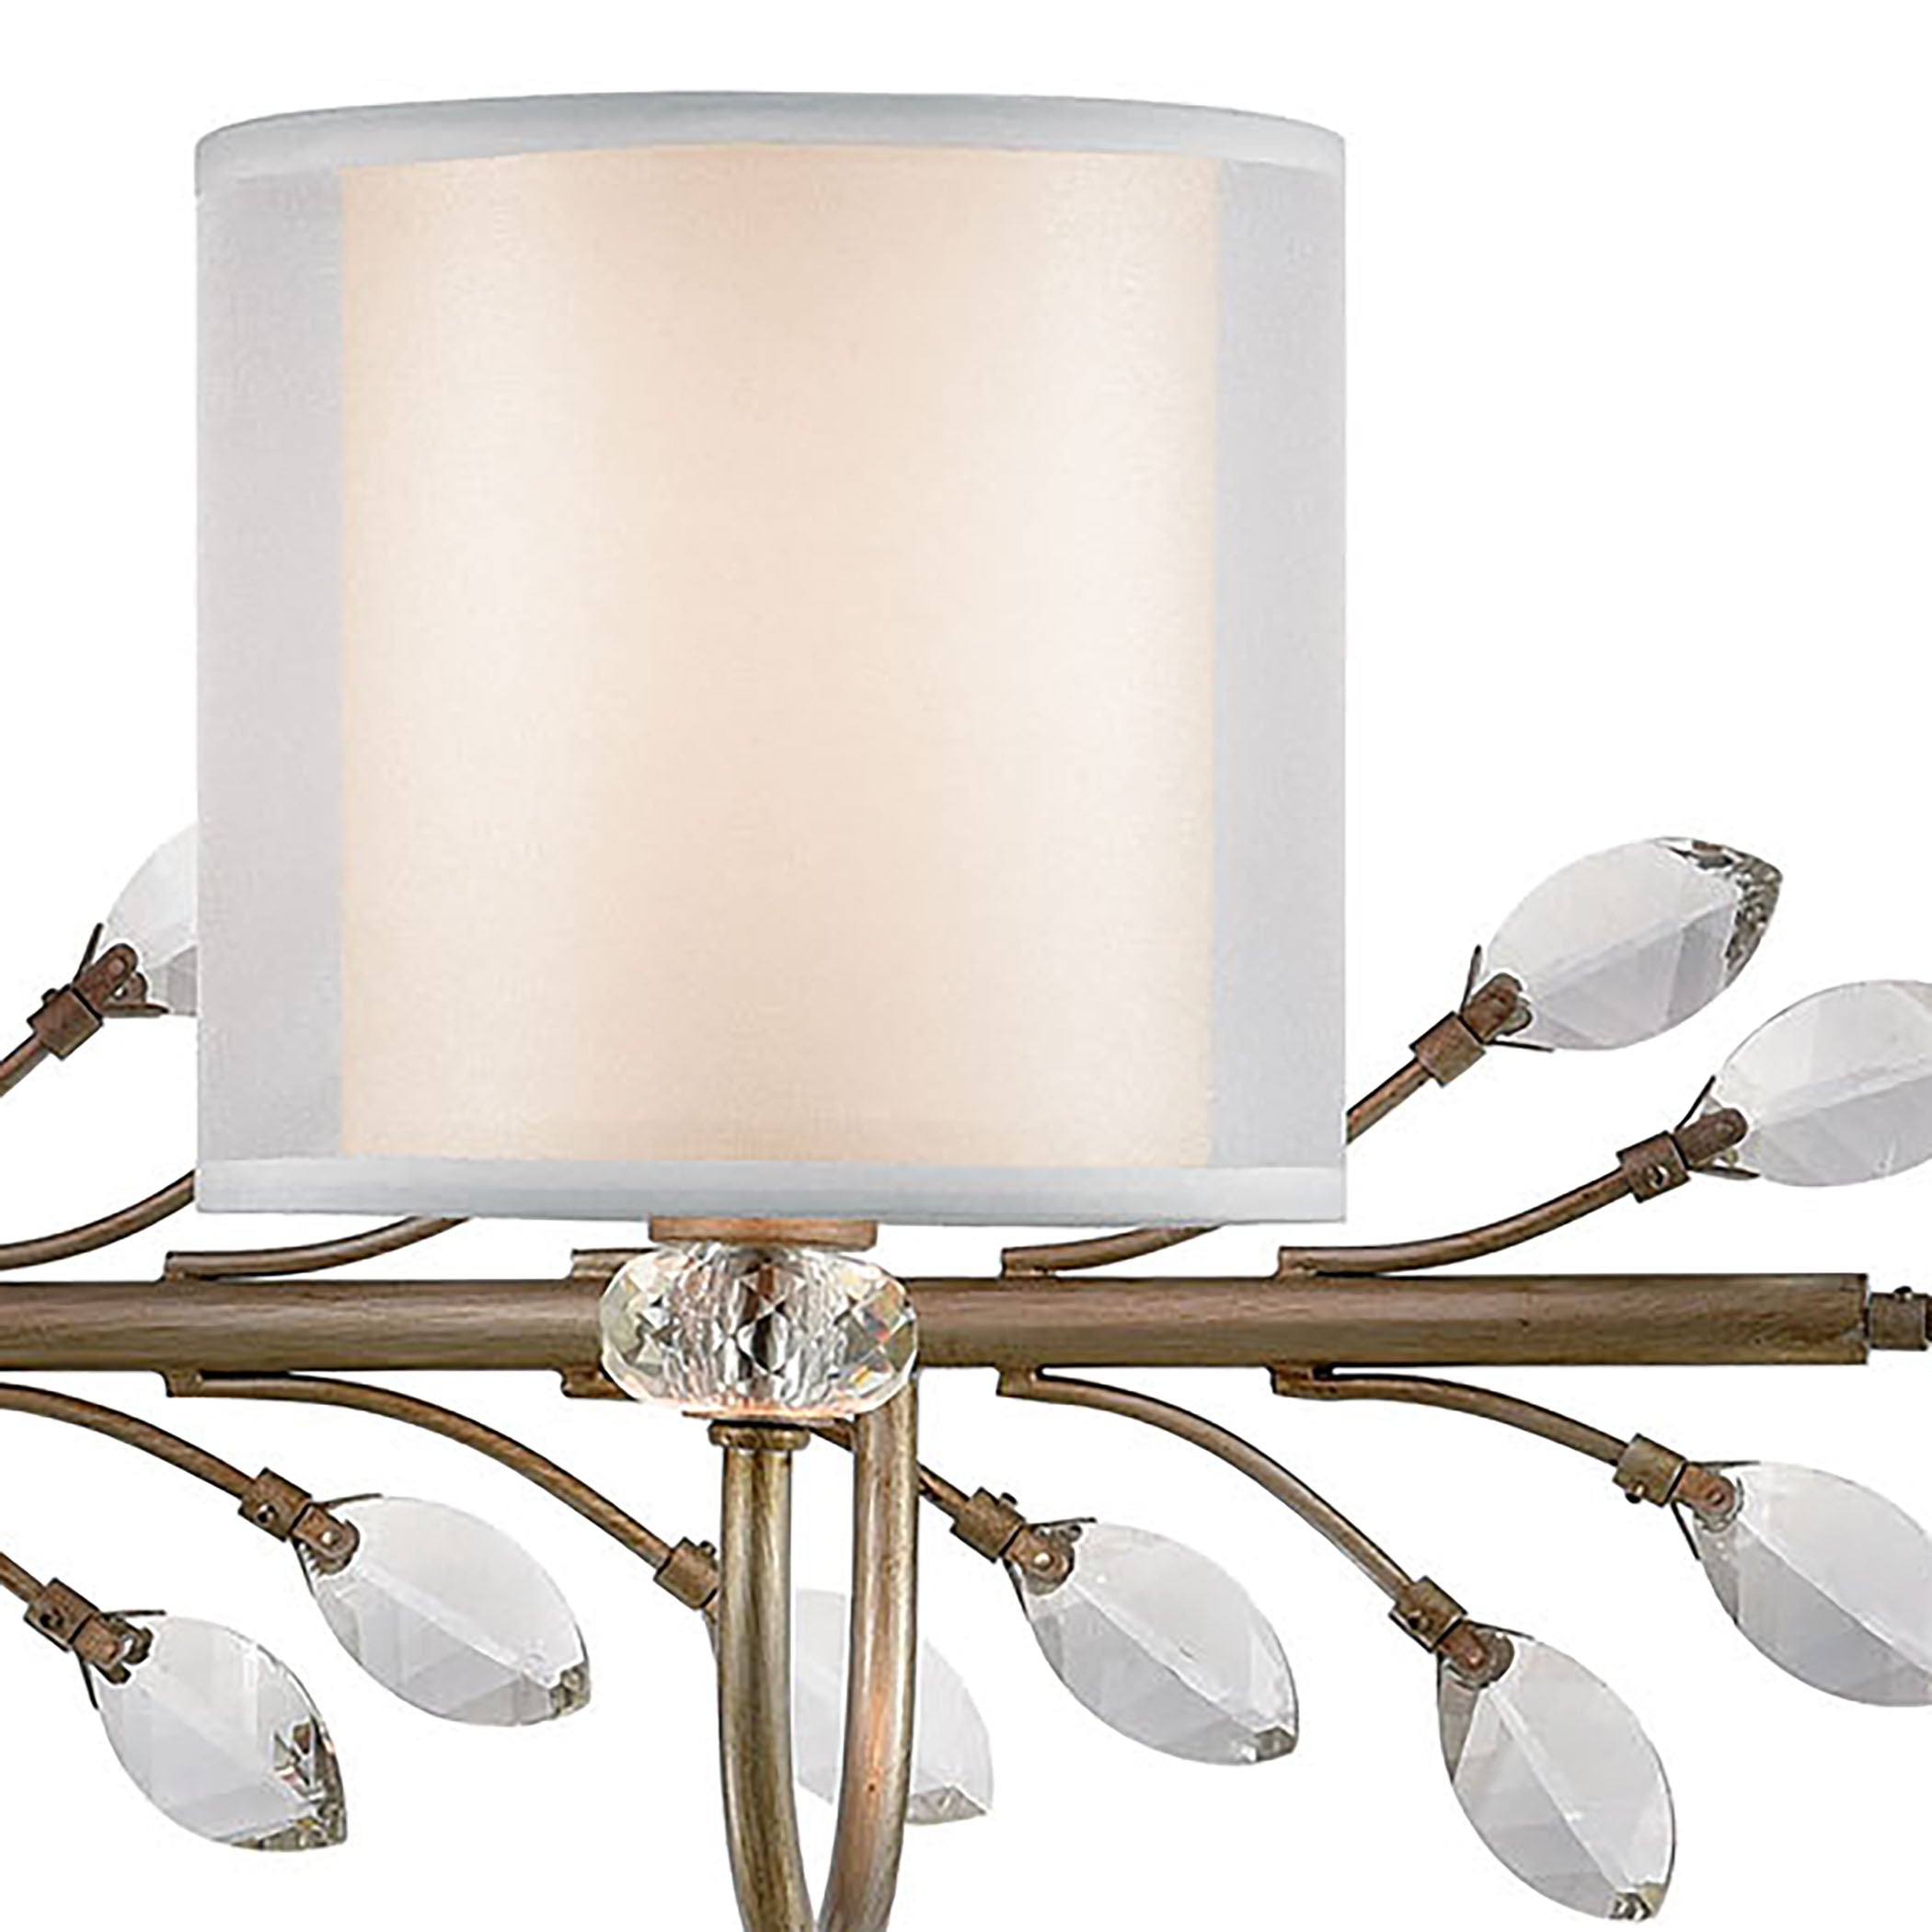 ELK Lighting 16278/3 Asbury 3-Light Vanity Light in Aged Silver with White Fabric Shade Inside Silver Organza Shade